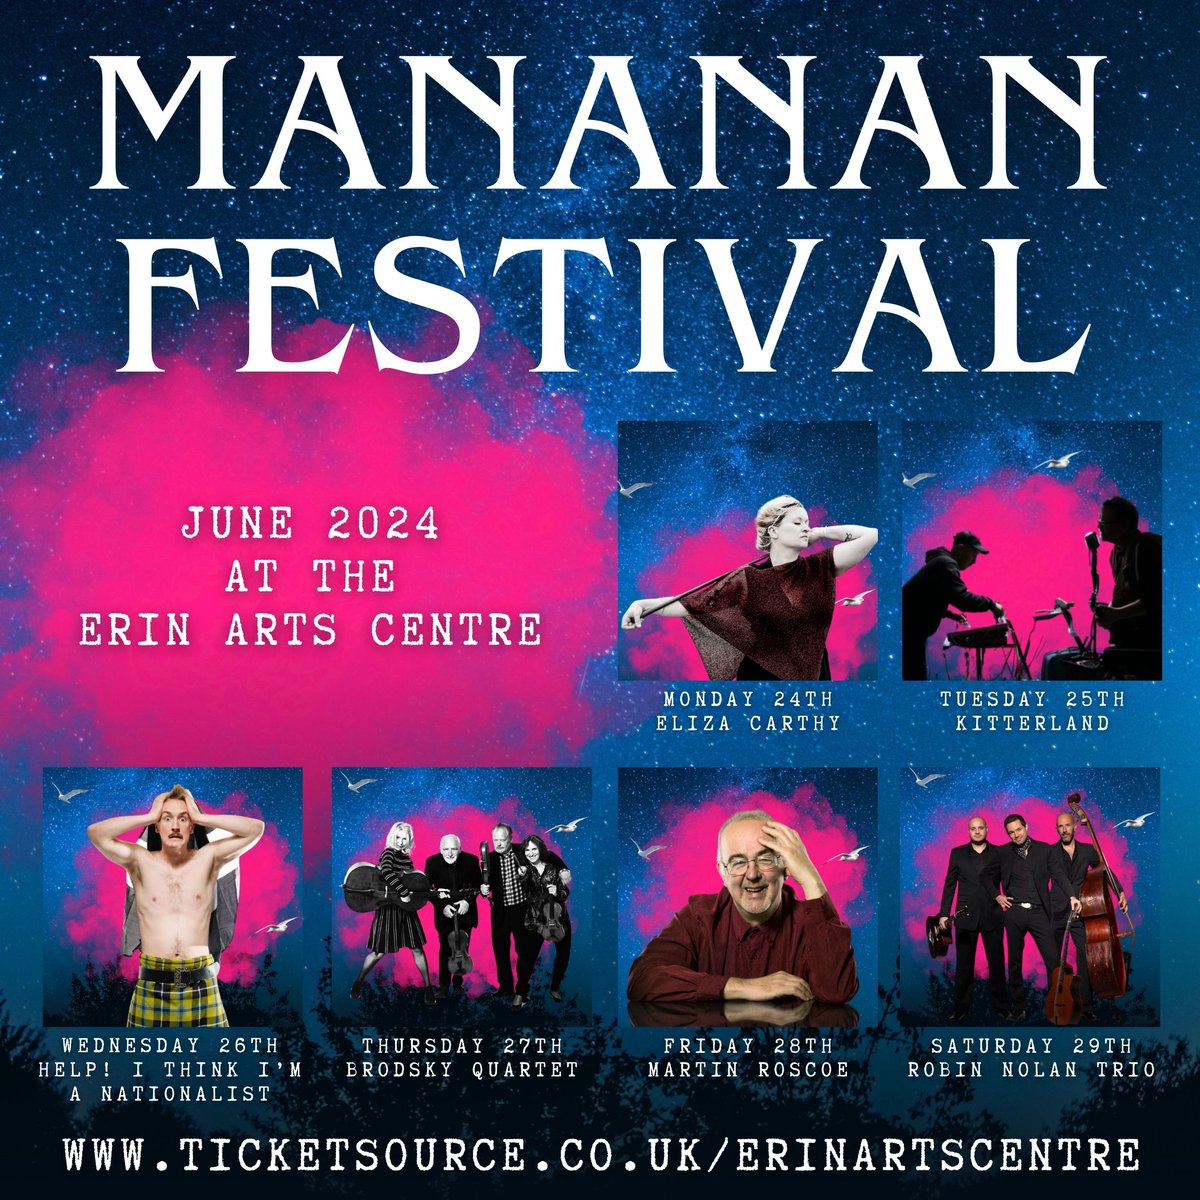 Tickets for our Mananan Festival in June this year go on sale very soon! Friends of the EAC can book tickets NOW and tickets will go on sale to the public at 9am on Monday 1st April. #erinartscentre #porterin #isleofman #manananfestival #manx #festival